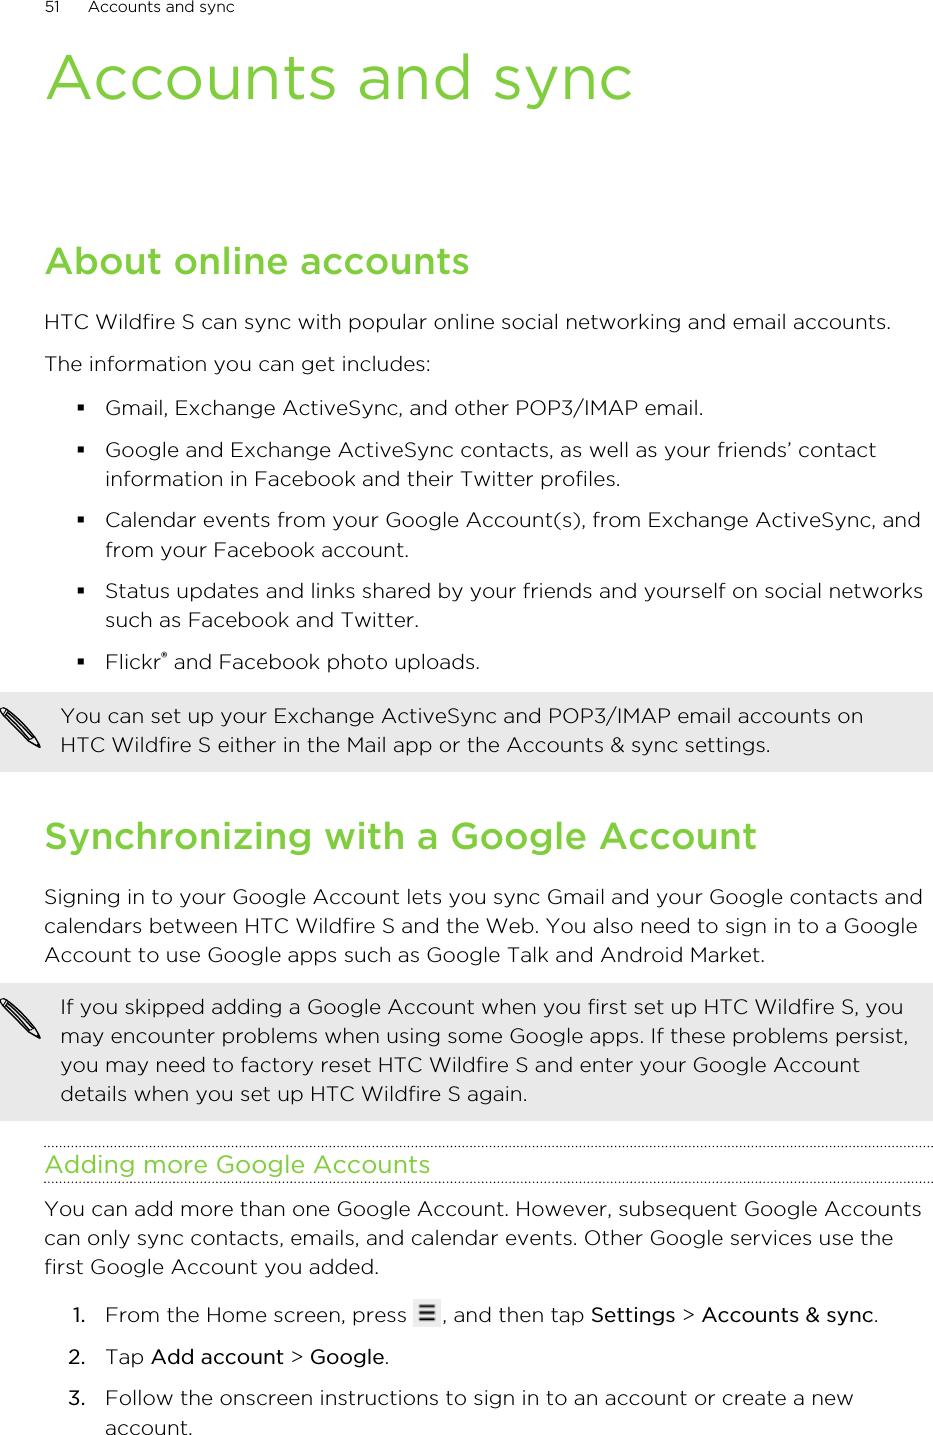 Accounts and syncAbout online accountsHTC Wildfire S can sync with popular online social networking and email accounts.The information you can get includes:§Gmail, Exchange ActiveSync, and other POP3/IMAP email.§Google and Exchange ActiveSync contacts, as well as your friends’ contactinformation in Facebook and their Twitter profiles.§Calendar events from your Google Account(s), from Exchange ActiveSync, andfrom your Facebook account.§Status updates and links shared by your friends and yourself on social networkssuch as Facebook and Twitter.§Flickr® and Facebook photo uploads.You can set up your Exchange ActiveSync and POP3/IMAP email accounts onHTC Wildfire S either in the Mail app or the Accounts &amp; sync settings.Synchronizing with a Google AccountSigning in to your Google Account lets you sync Gmail and your Google contacts andcalendars between HTC Wildfire S and the Web. You also need to sign in to a GoogleAccount to use Google apps such as Google Talk and Android Market.If you skipped adding a Google Account when you first set up HTC Wildfire S, youmay encounter problems when using some Google apps. If these problems persist,you may need to factory reset HTC Wildfire S and enter your Google Accountdetails when you set up HTC Wildfire S again.Adding more Google AccountsYou can add more than one Google Account. However, subsequent Google Accountscan only sync contacts, emails, and calendar events. Other Google services use thefirst Google Account you added.1. From the Home screen, press  , and then tap Settings &gt; Accounts &amp; sync.2. Tap Add account &gt; Google.3. Follow the onscreen instructions to sign in to an account or create a newaccount.51 Accounts and sync